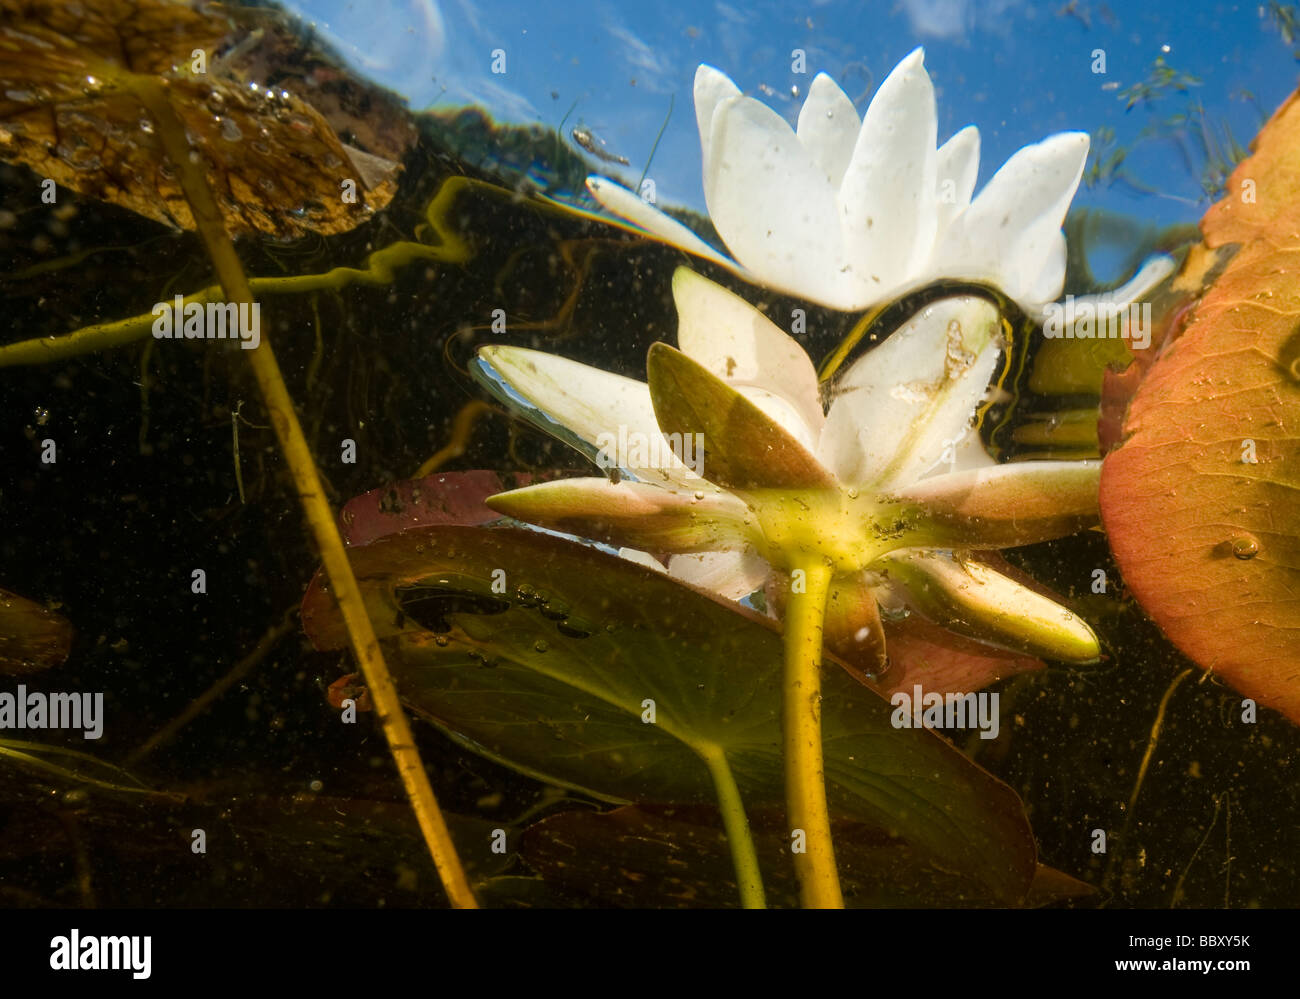 Nymphaea alba, also known as the European White Waterlily, White Lotus, or Nenuphar, is an aquatic flowering plant of the family Stock Photo